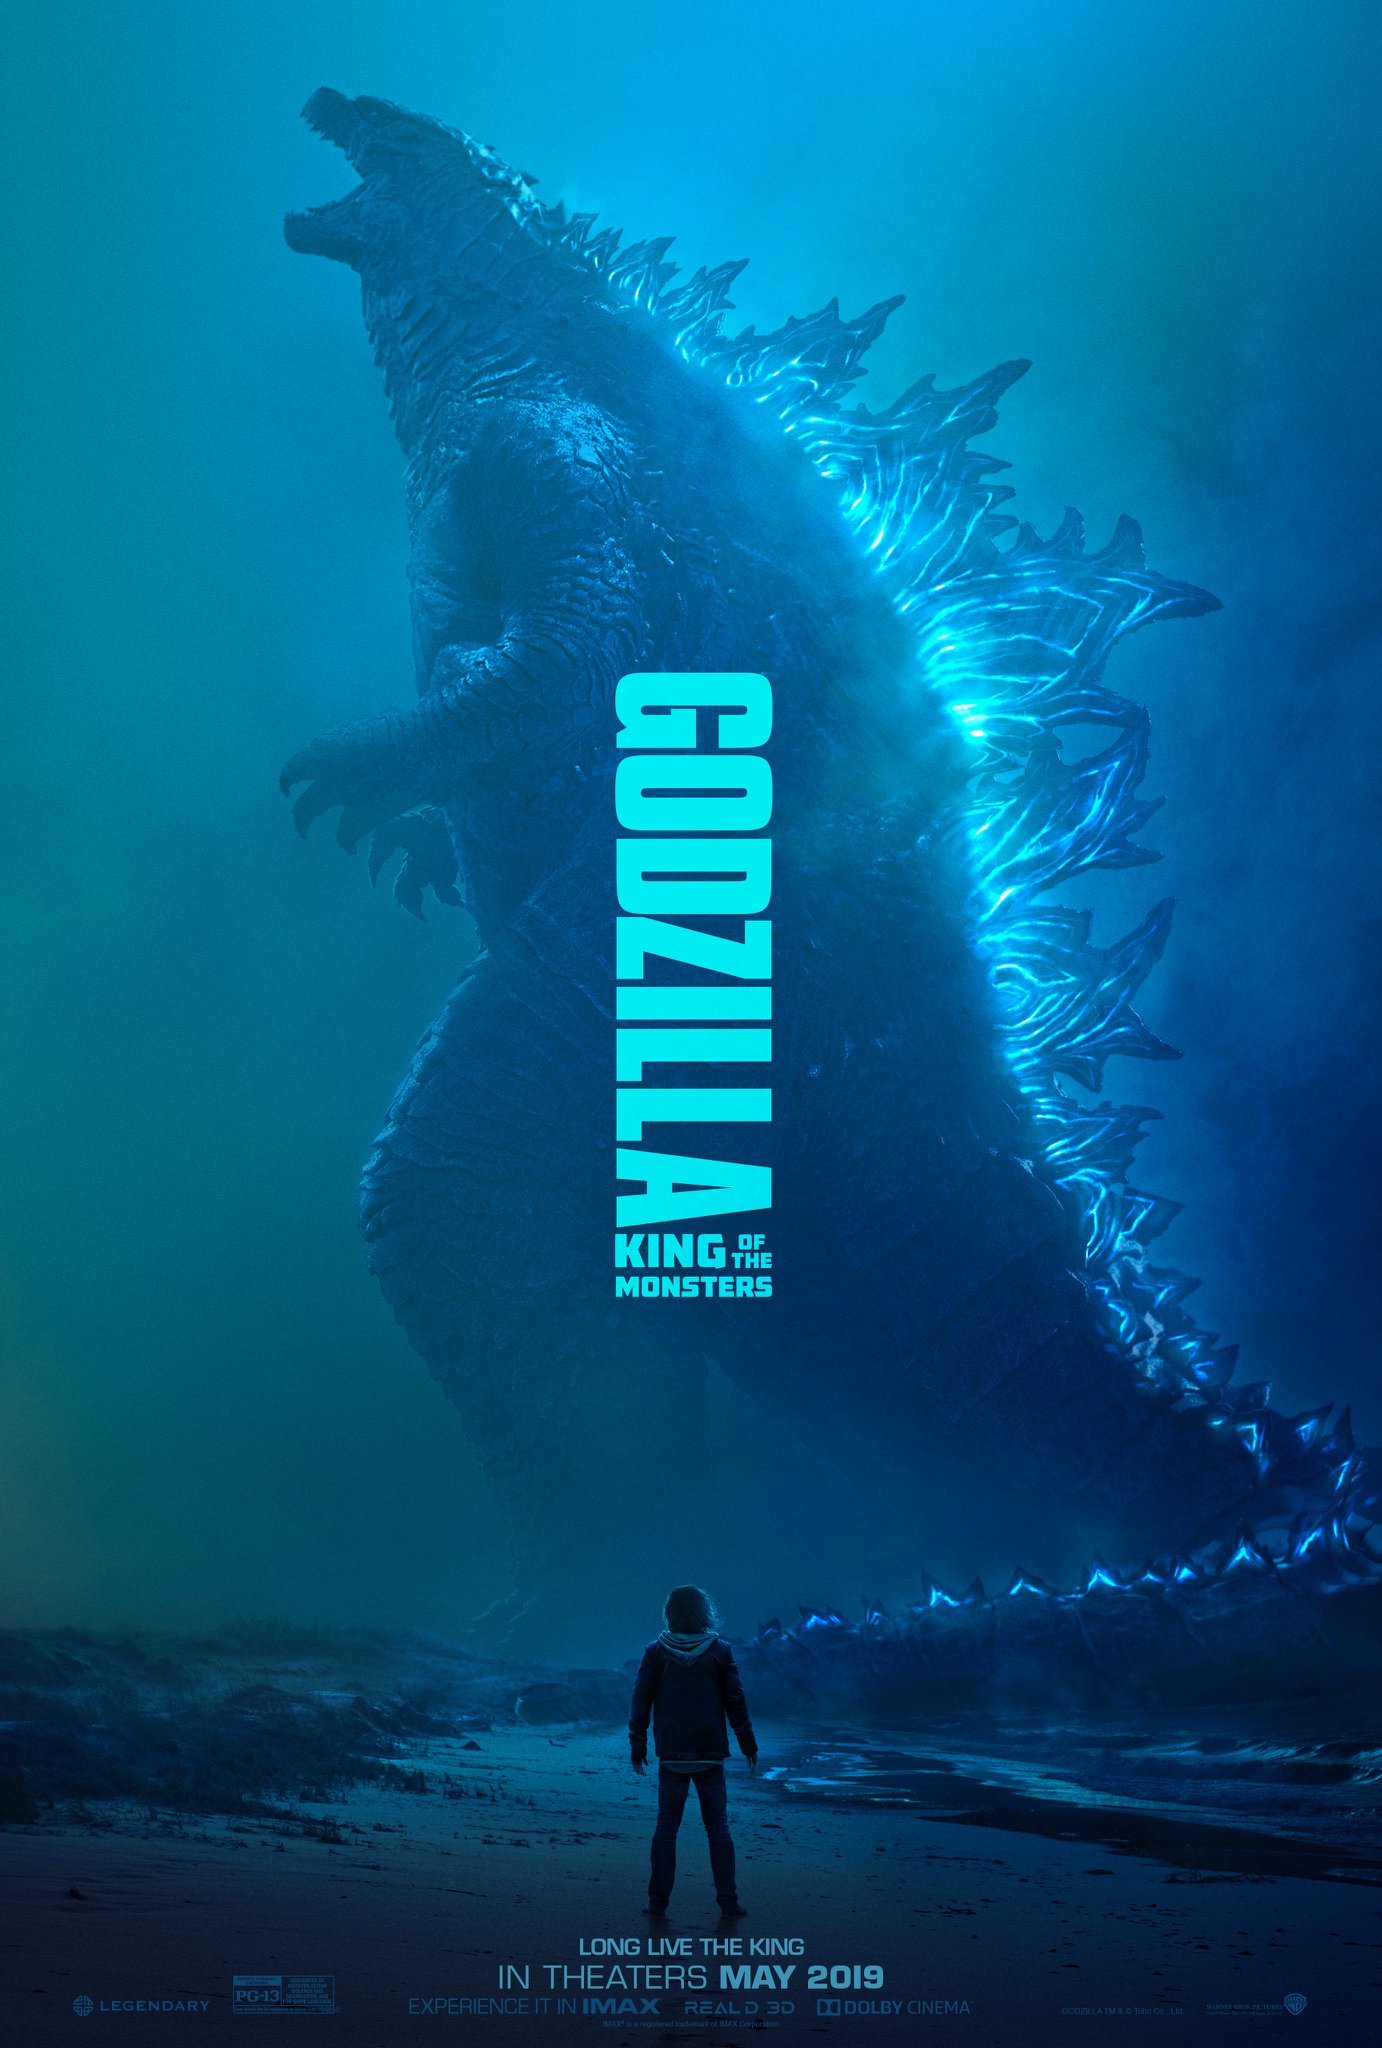 giant-monstrous-titans-go-to-war-in-epic-new-trailer-for-godzilla-king-of-the-monsters1